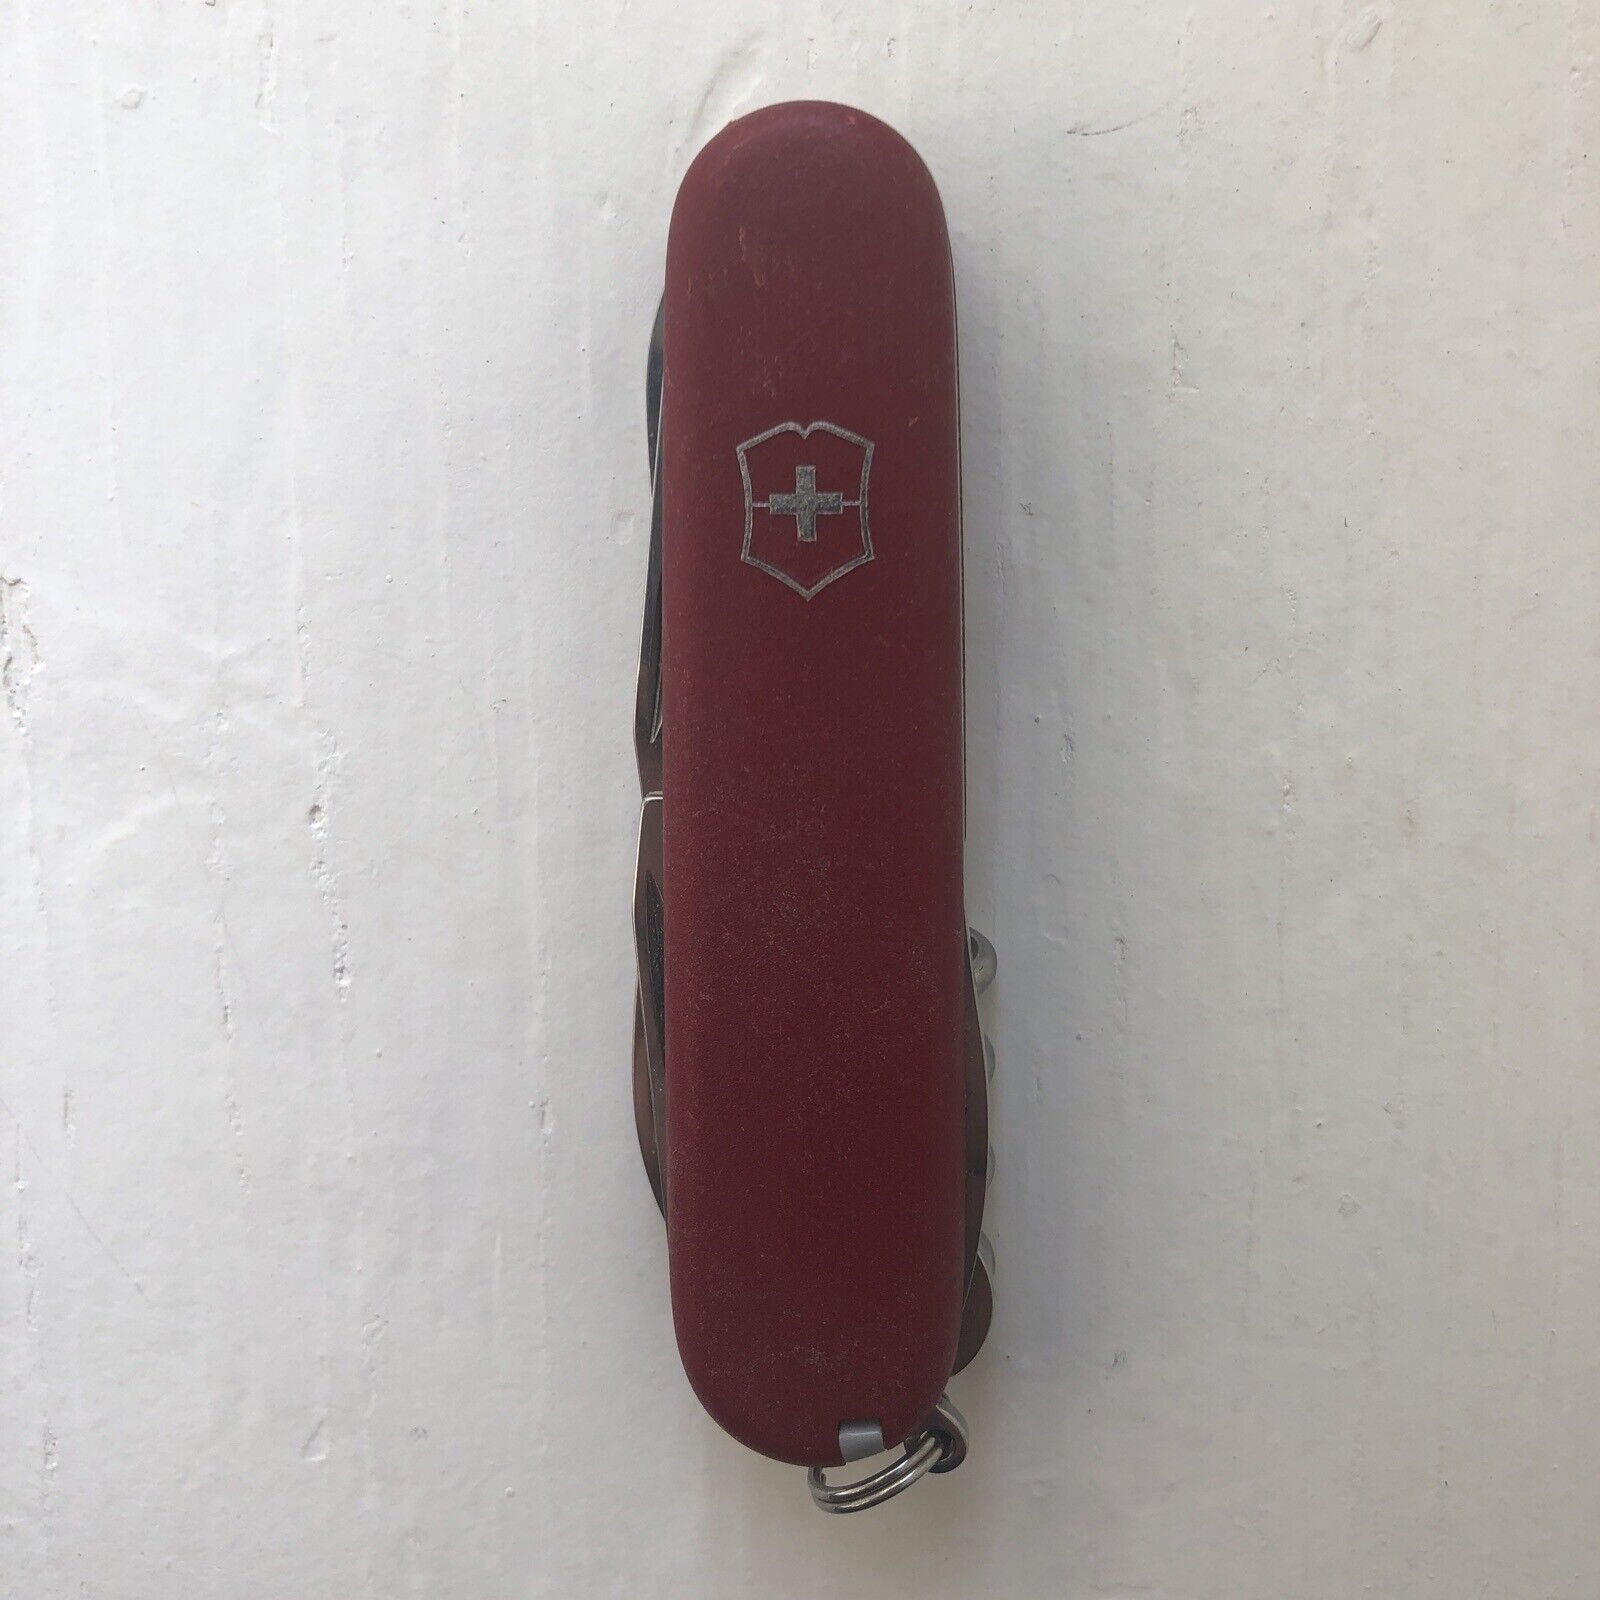 Victorinox Officer Suisse RED Swiss Army Knife SWITZERLAND SWISS MADE